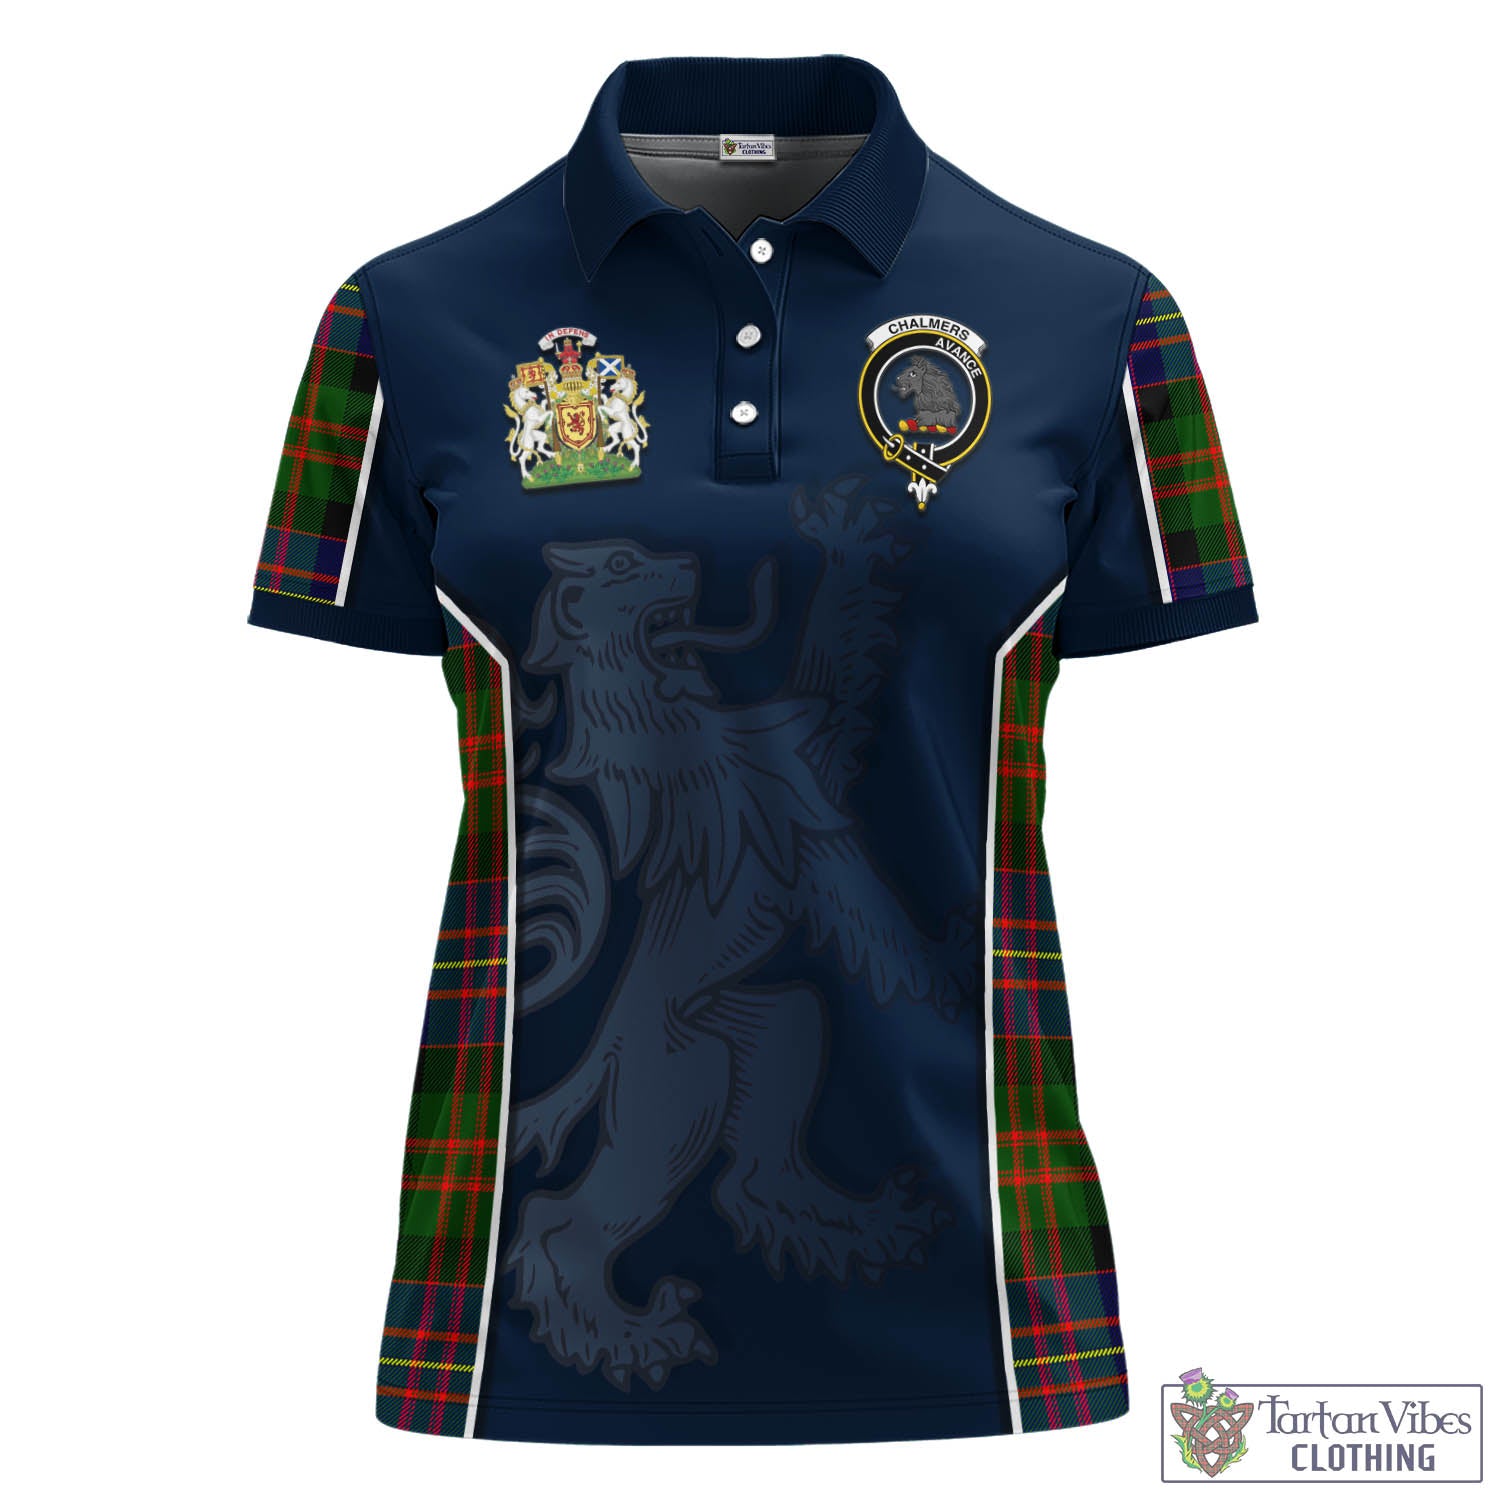 Tartan Vibes Clothing Chalmers Modern Tartan Women's Polo Shirt with Family Crest and Lion Rampant Vibes Sport Style